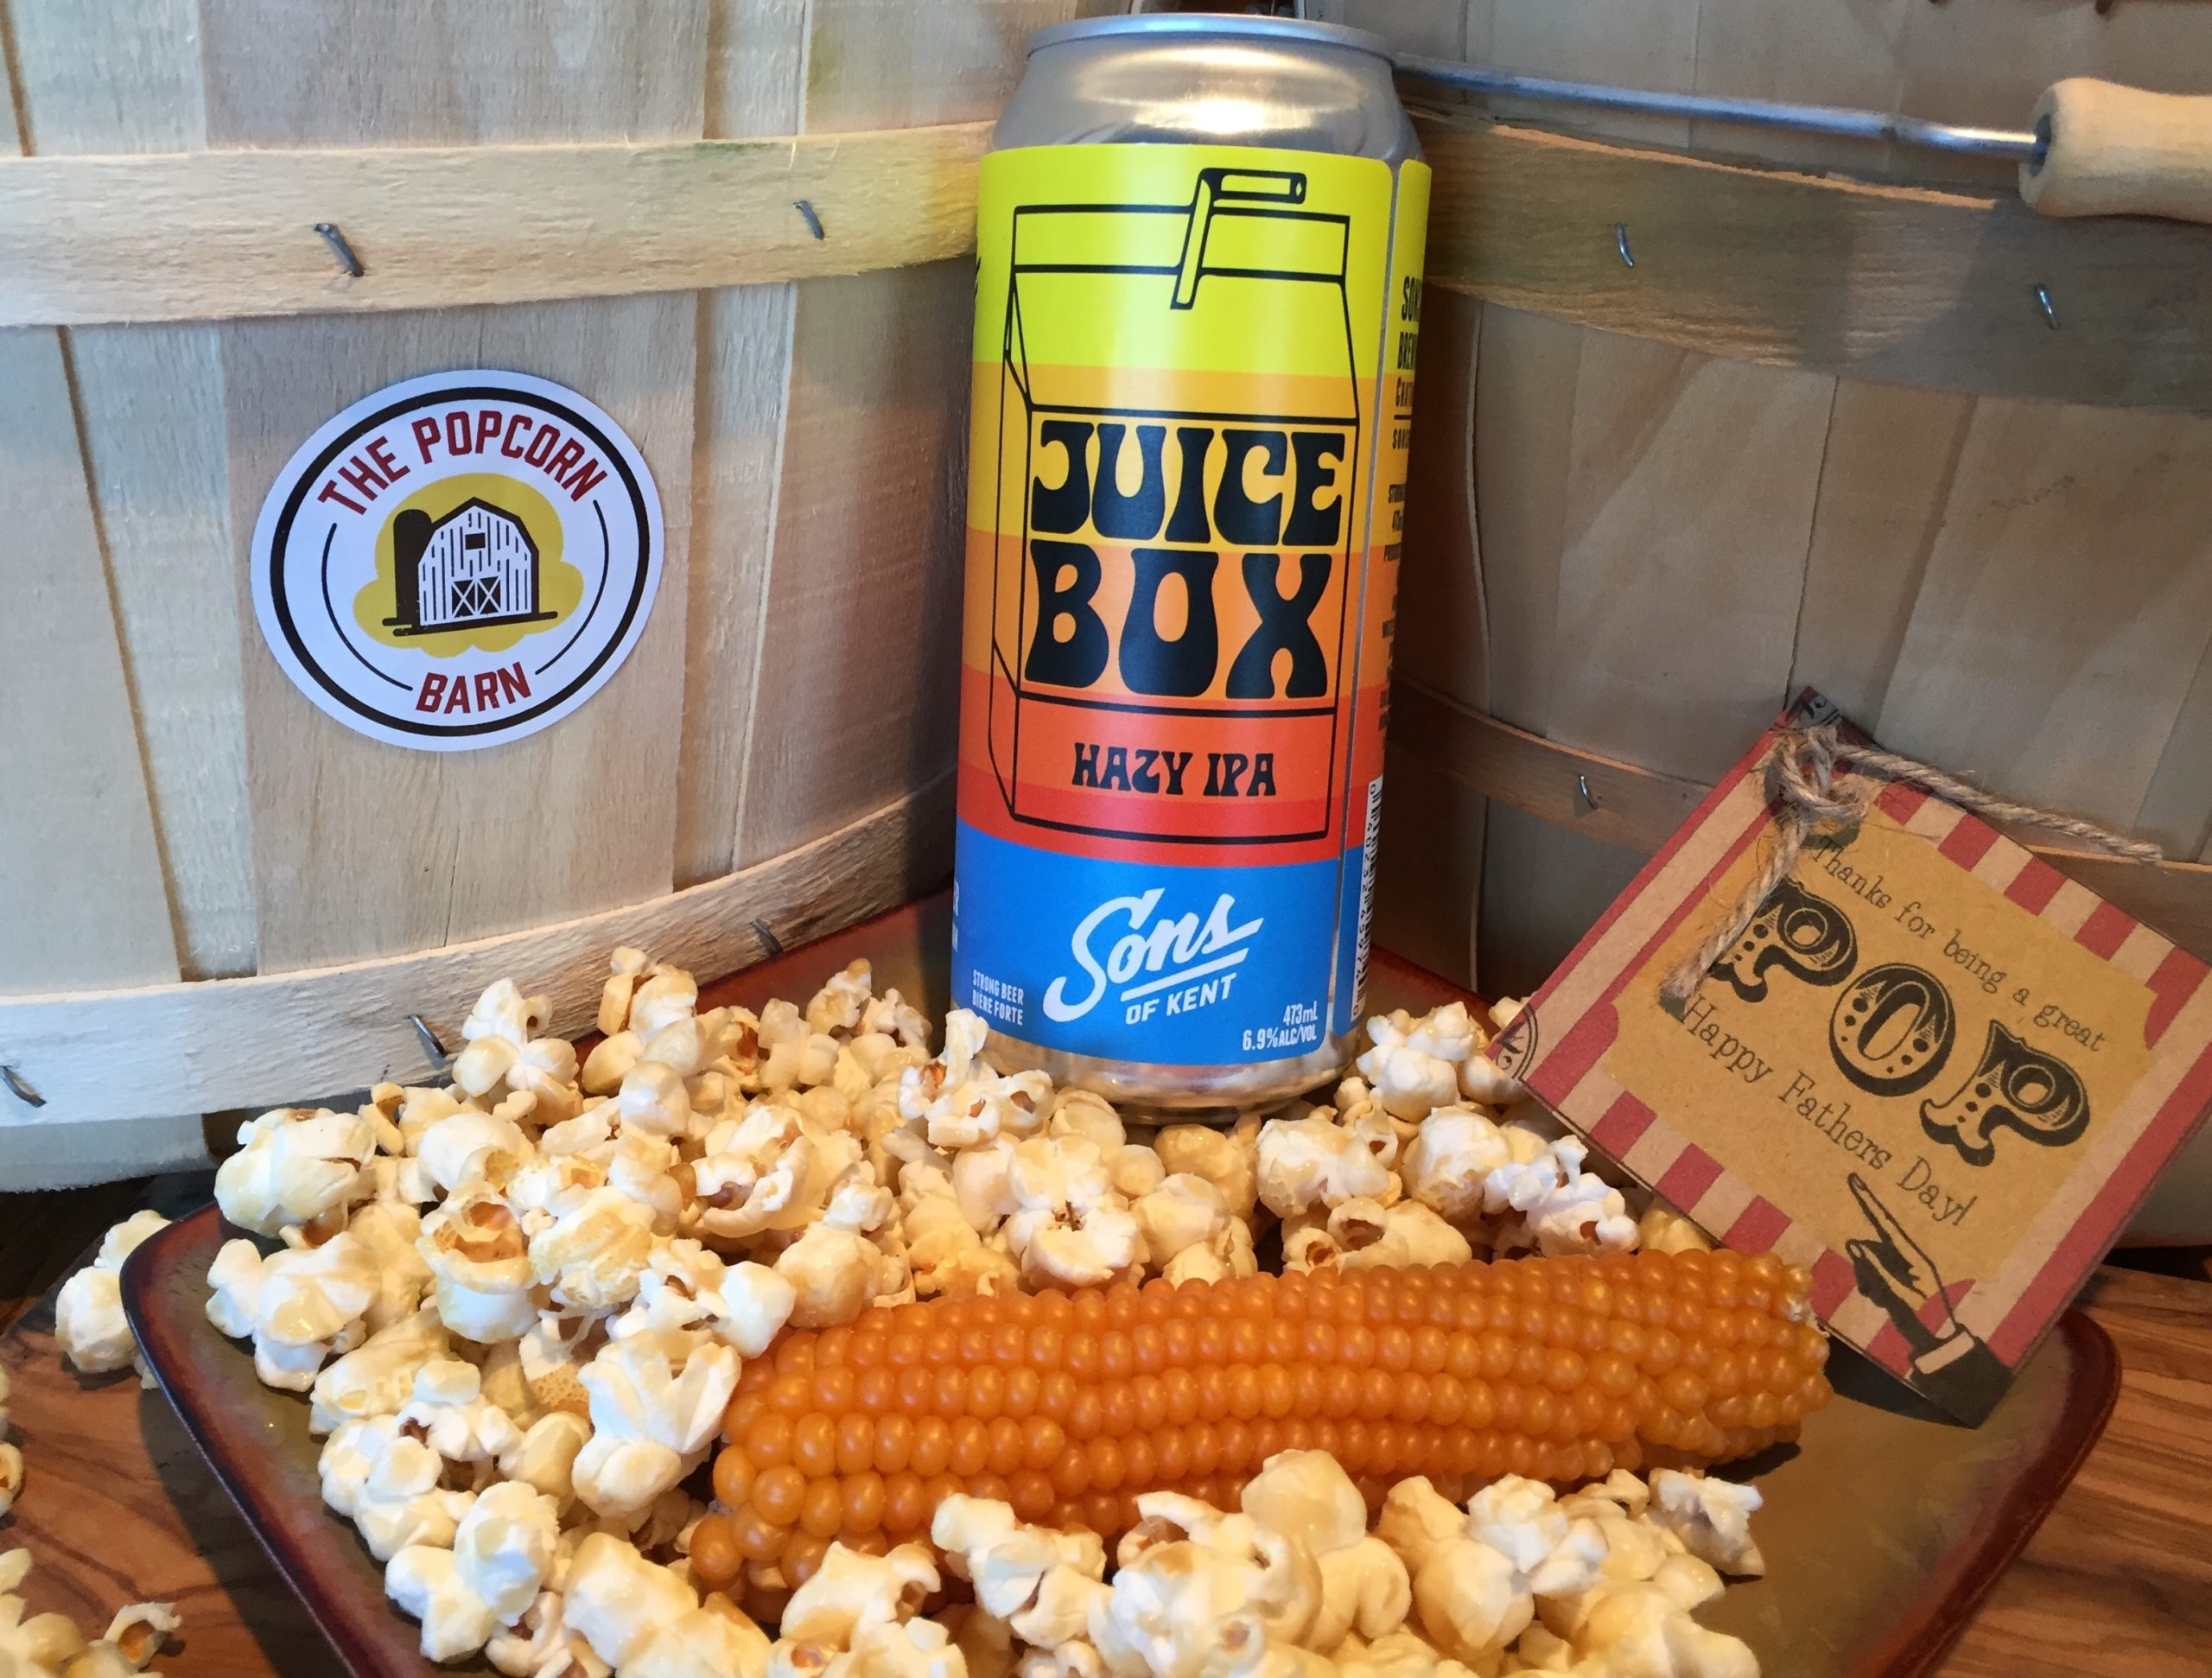 HAPPY FATHERS DAY!!! Celebrating all Dads with POPCORN & SONS OF KENT ~ JUICE BOX IPA~